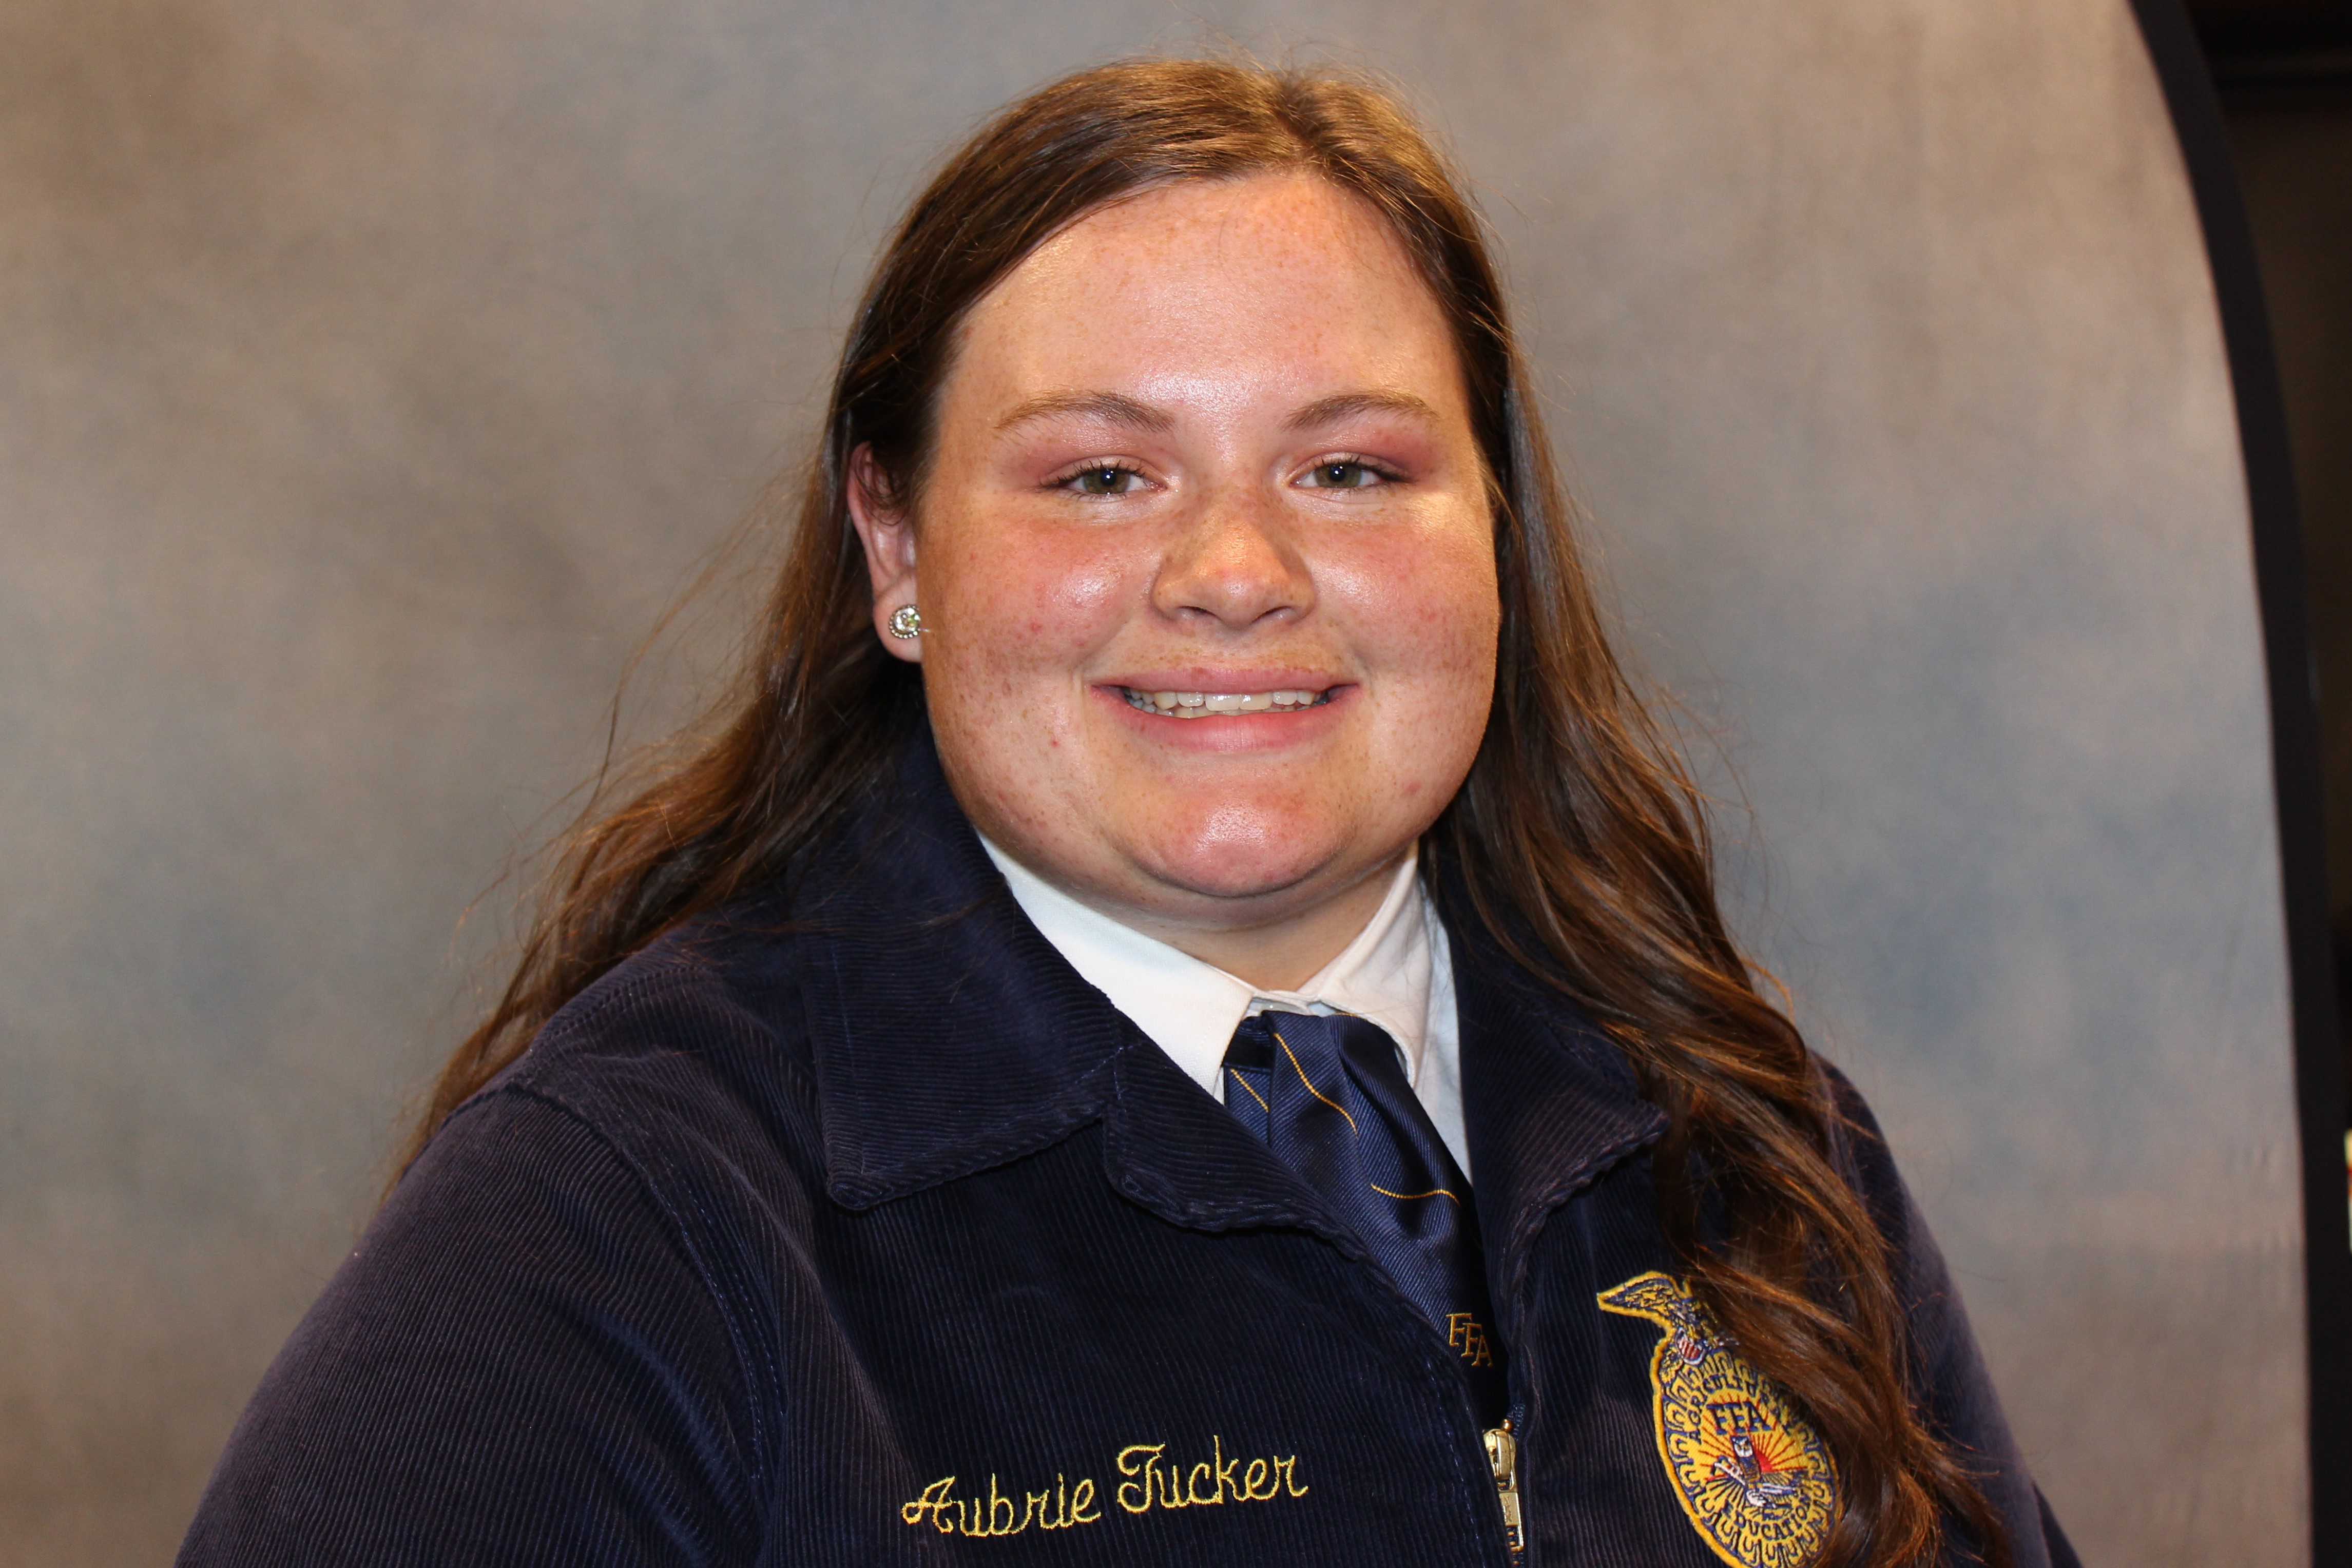 Introducing Aubrie Tucker of the Elgin FFA Chapter, Your 2021 Southwest Area Star in Agribusiness.